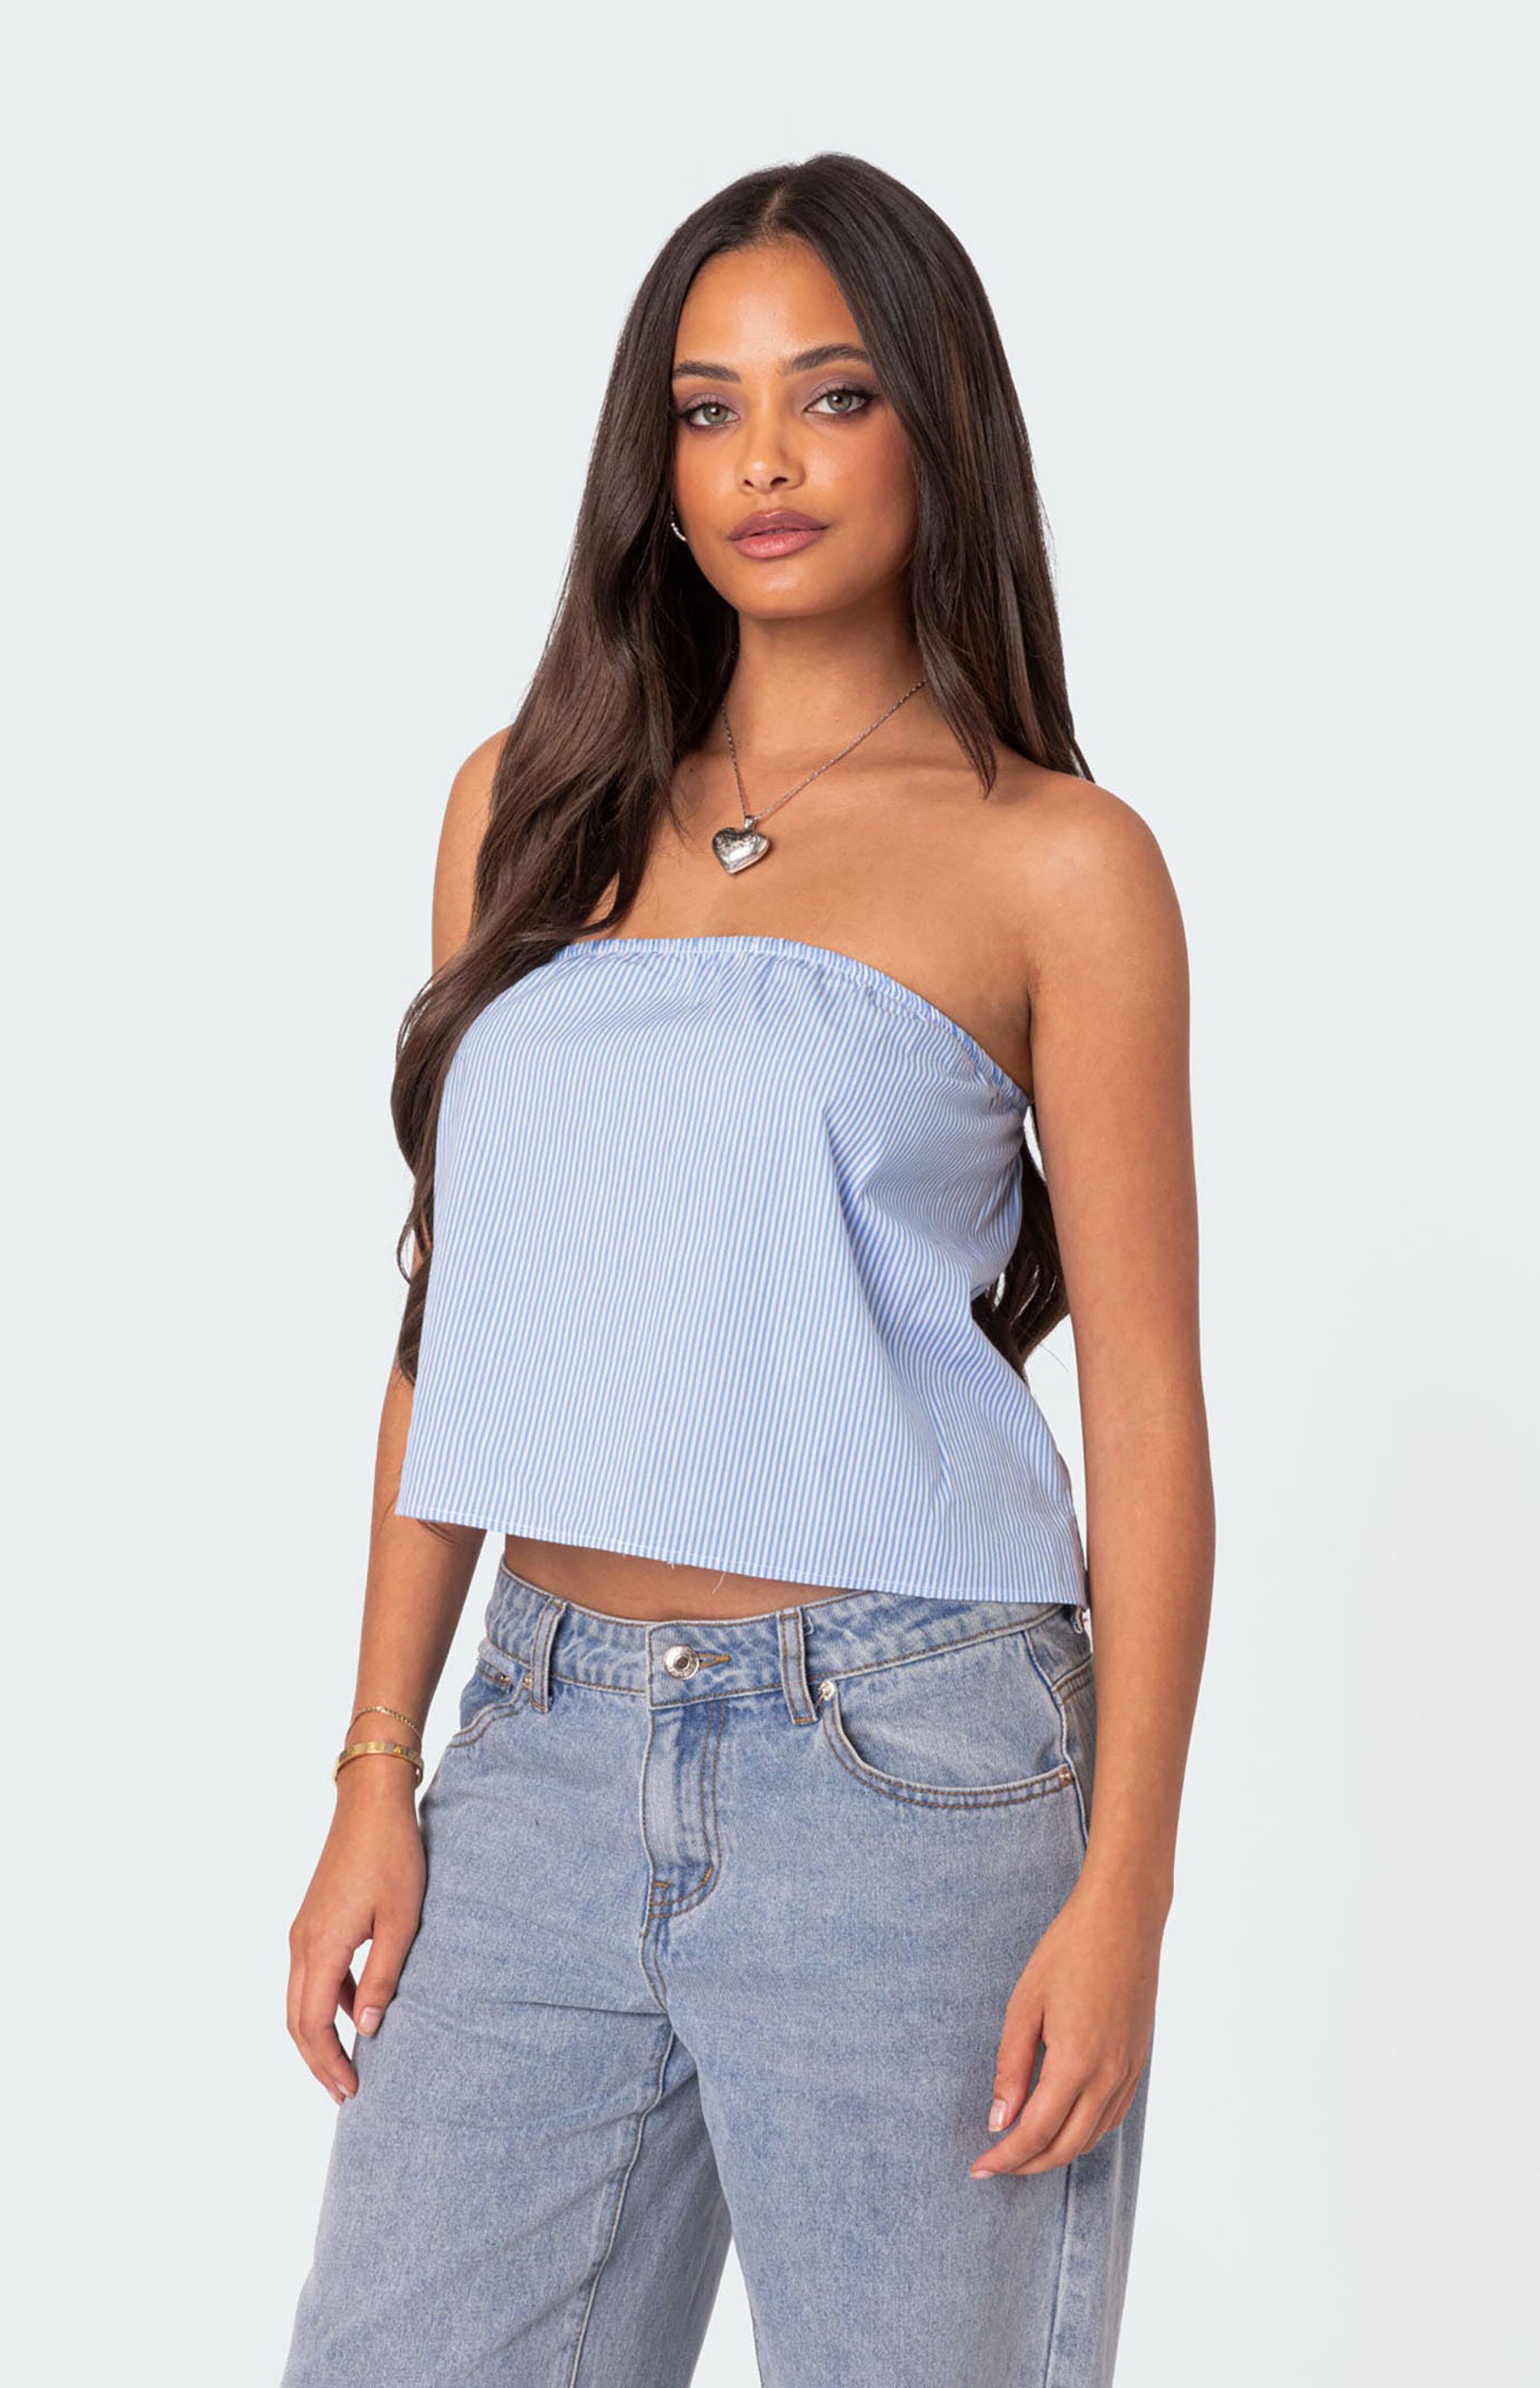 Edikted Toby Striped Tube Top | PacSun | PacSun